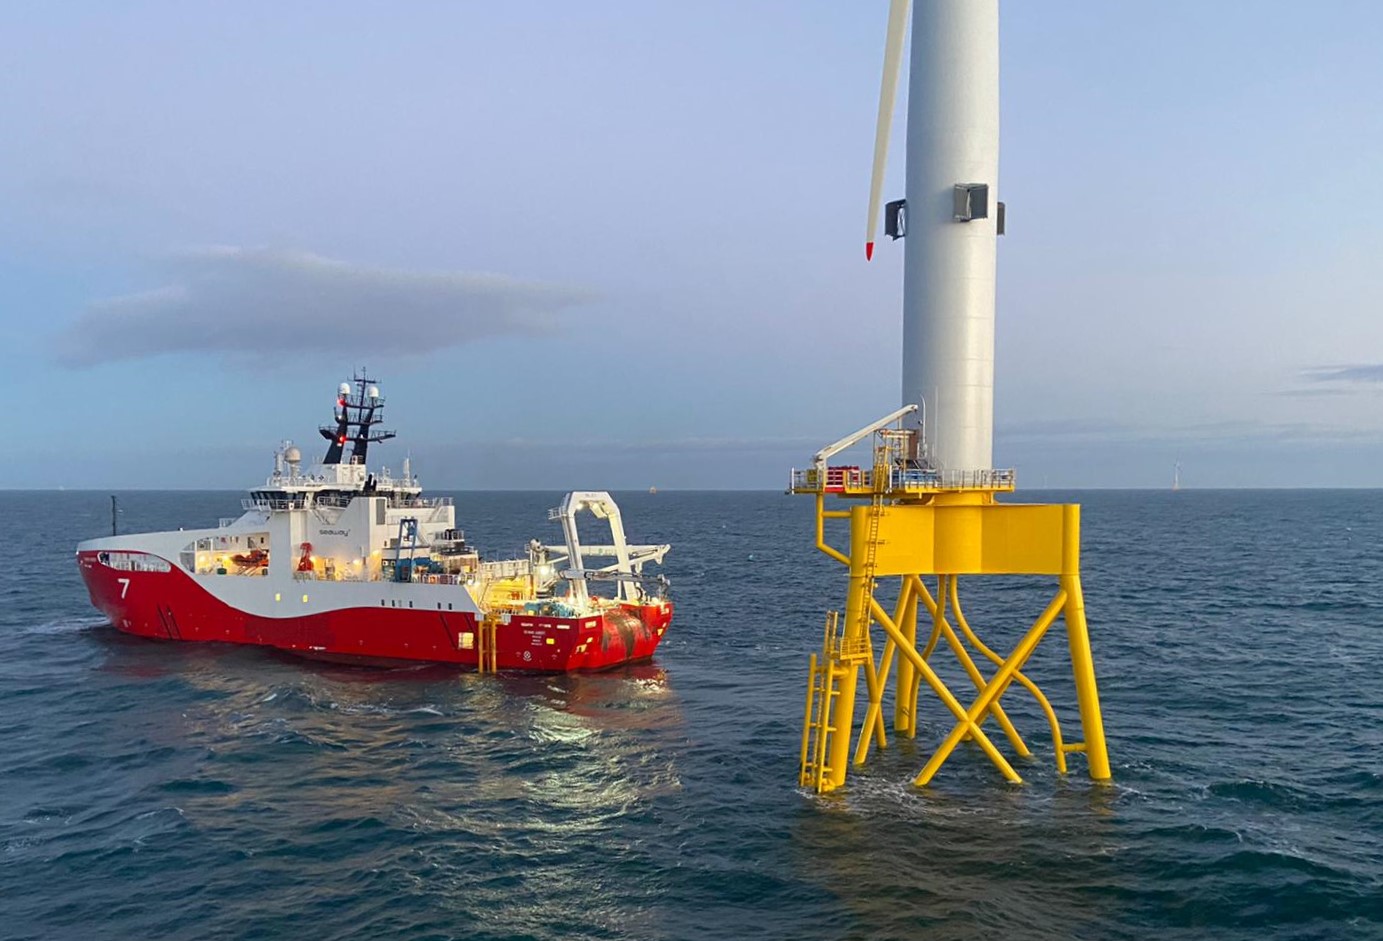 Seaway Aimery at Seagreen offshore wind farm